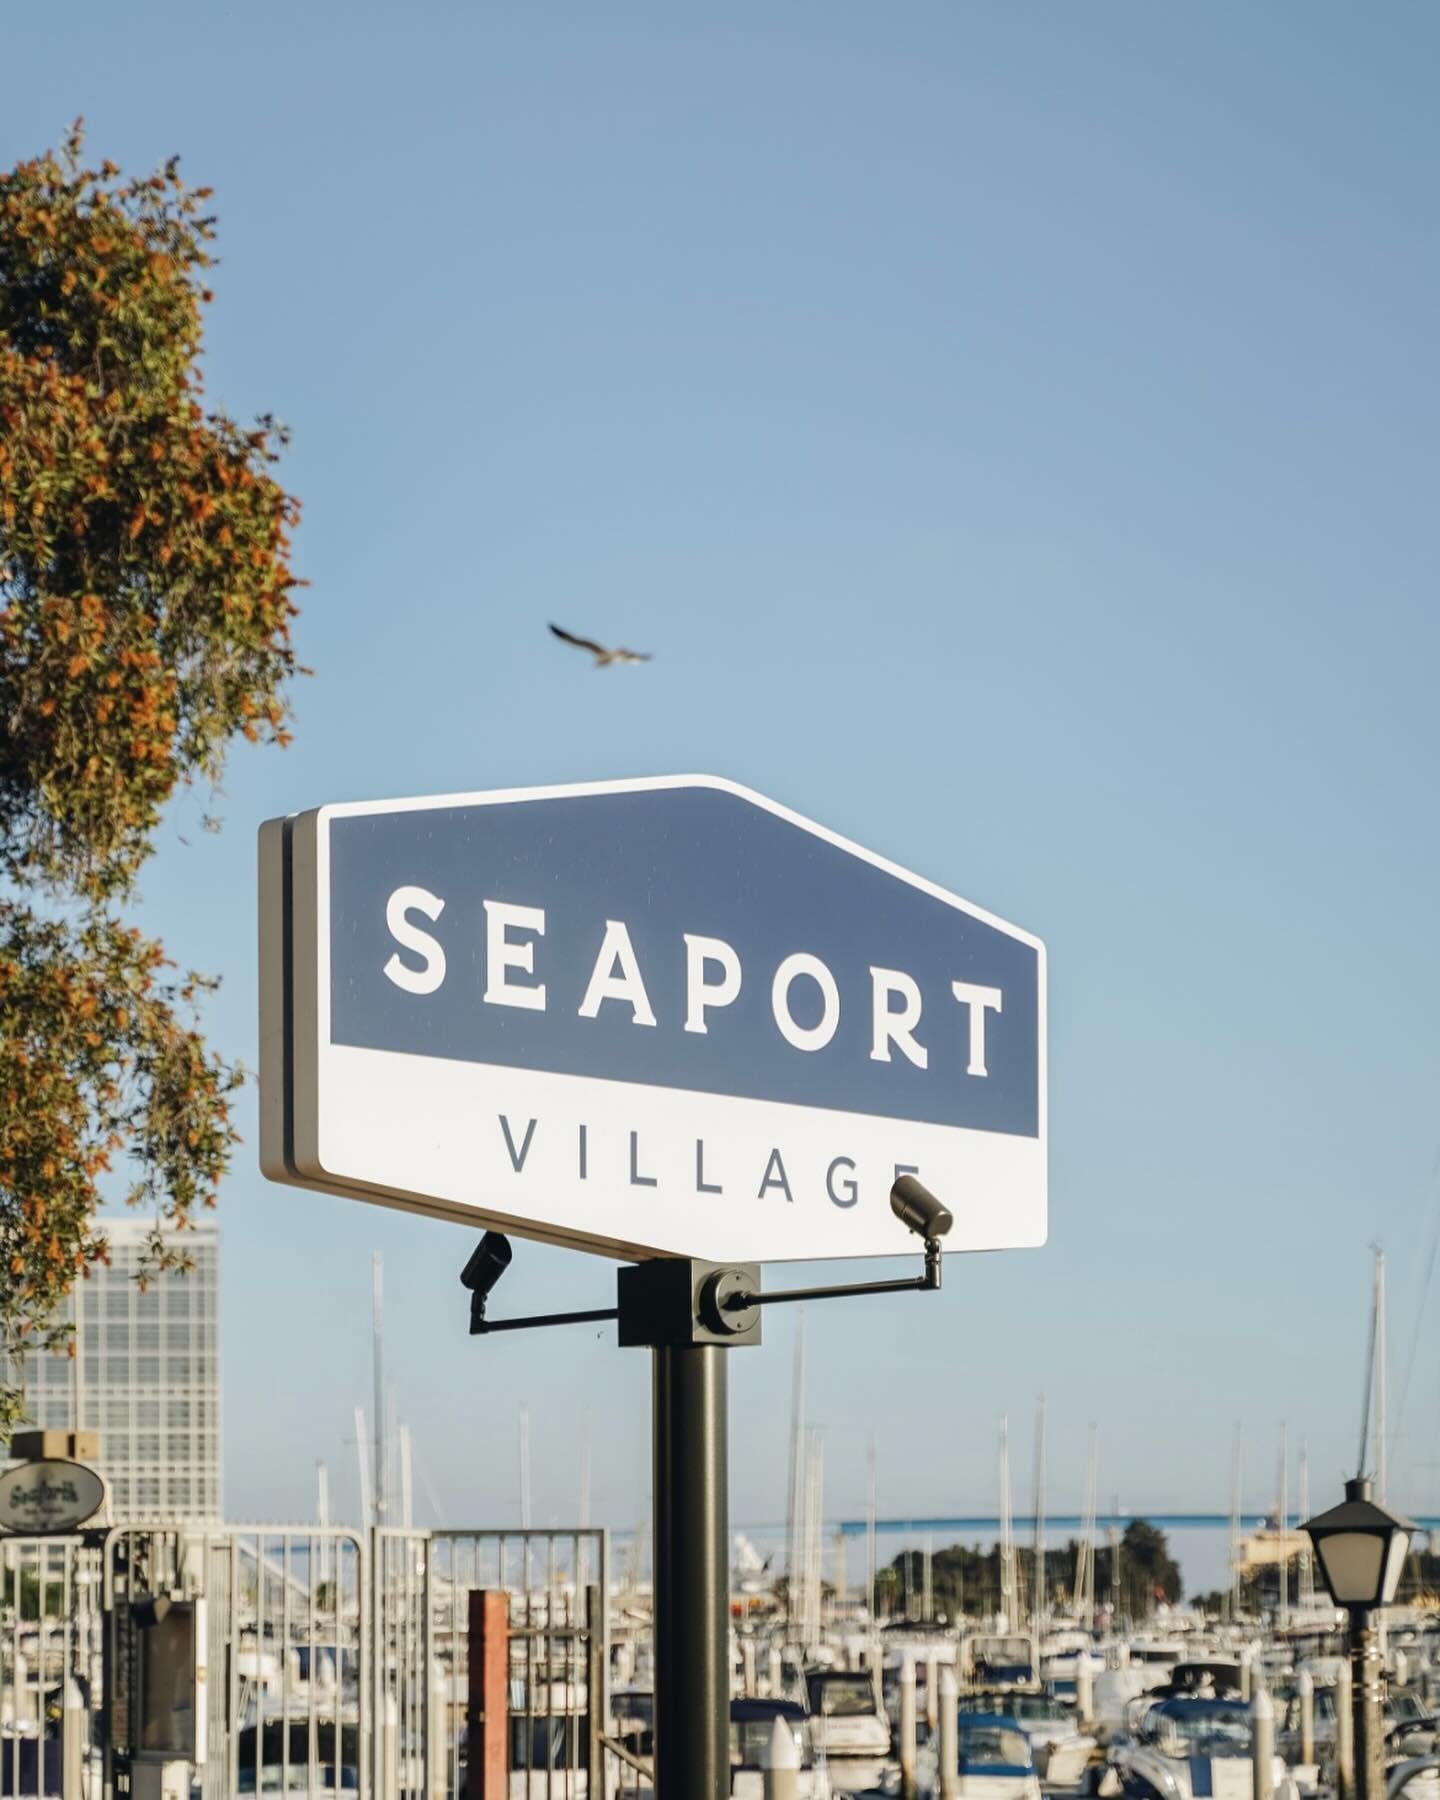 SAVE THE DATE 🌴🌞💙 ⁠
⁠
&amp; join us Saturday, June 8, from 3-7pm., as we kick off the summer with a very special Daycation Celebration at Seaport Village.⁠
⁠
Guests can enjoy...⁠
⁠
🌞Live music by local artists and a DJ dance party ⁠
🌞Woody car s